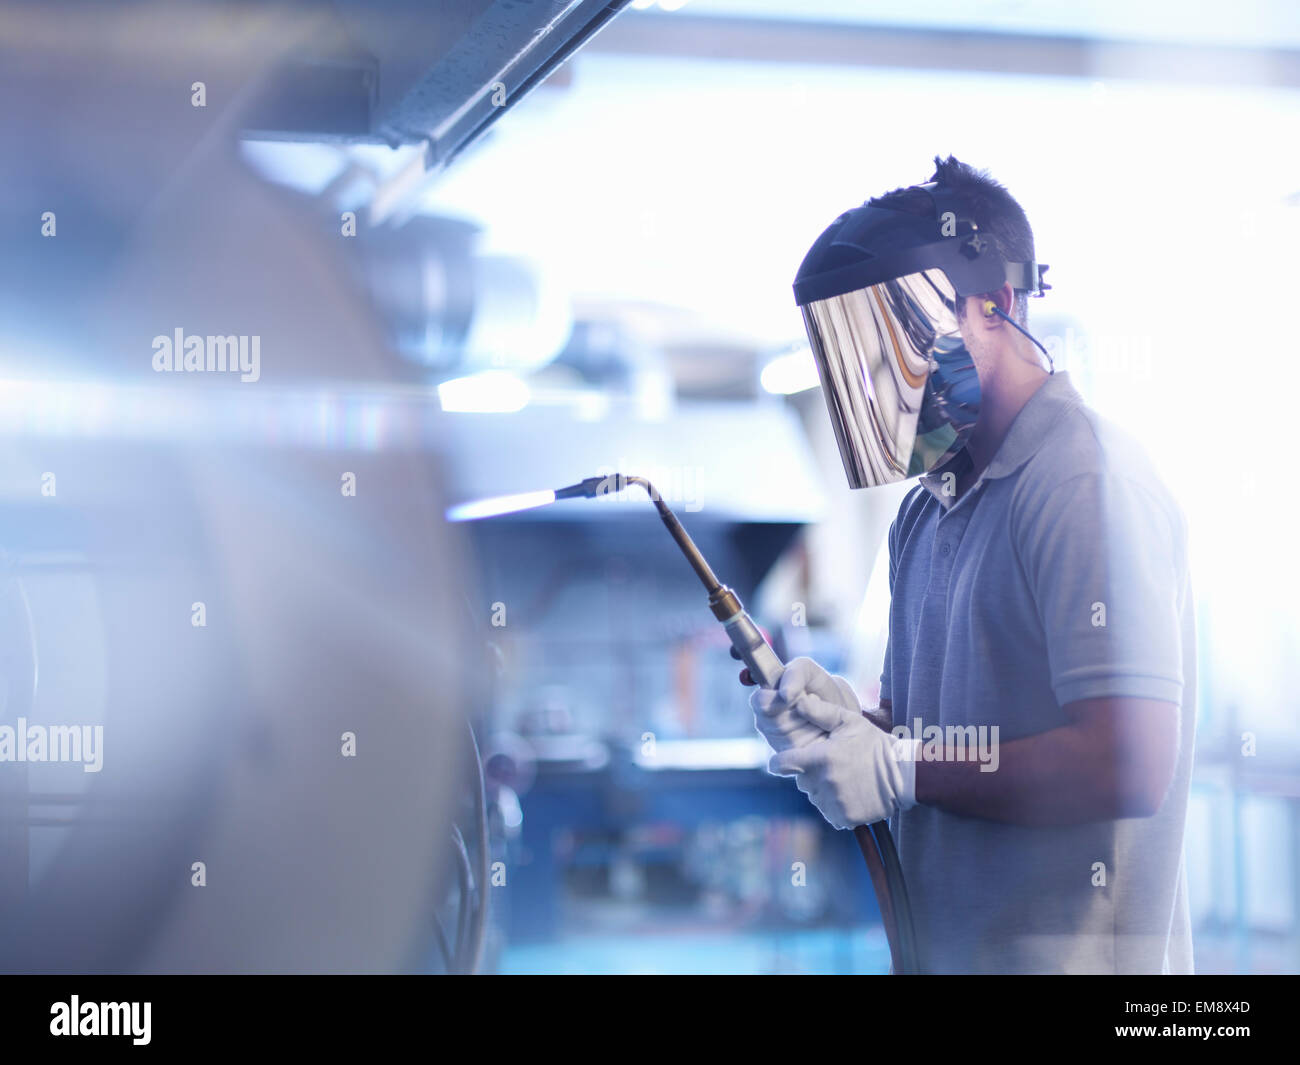 Apprentice glass blower wearing mask and using lance Stock Photo